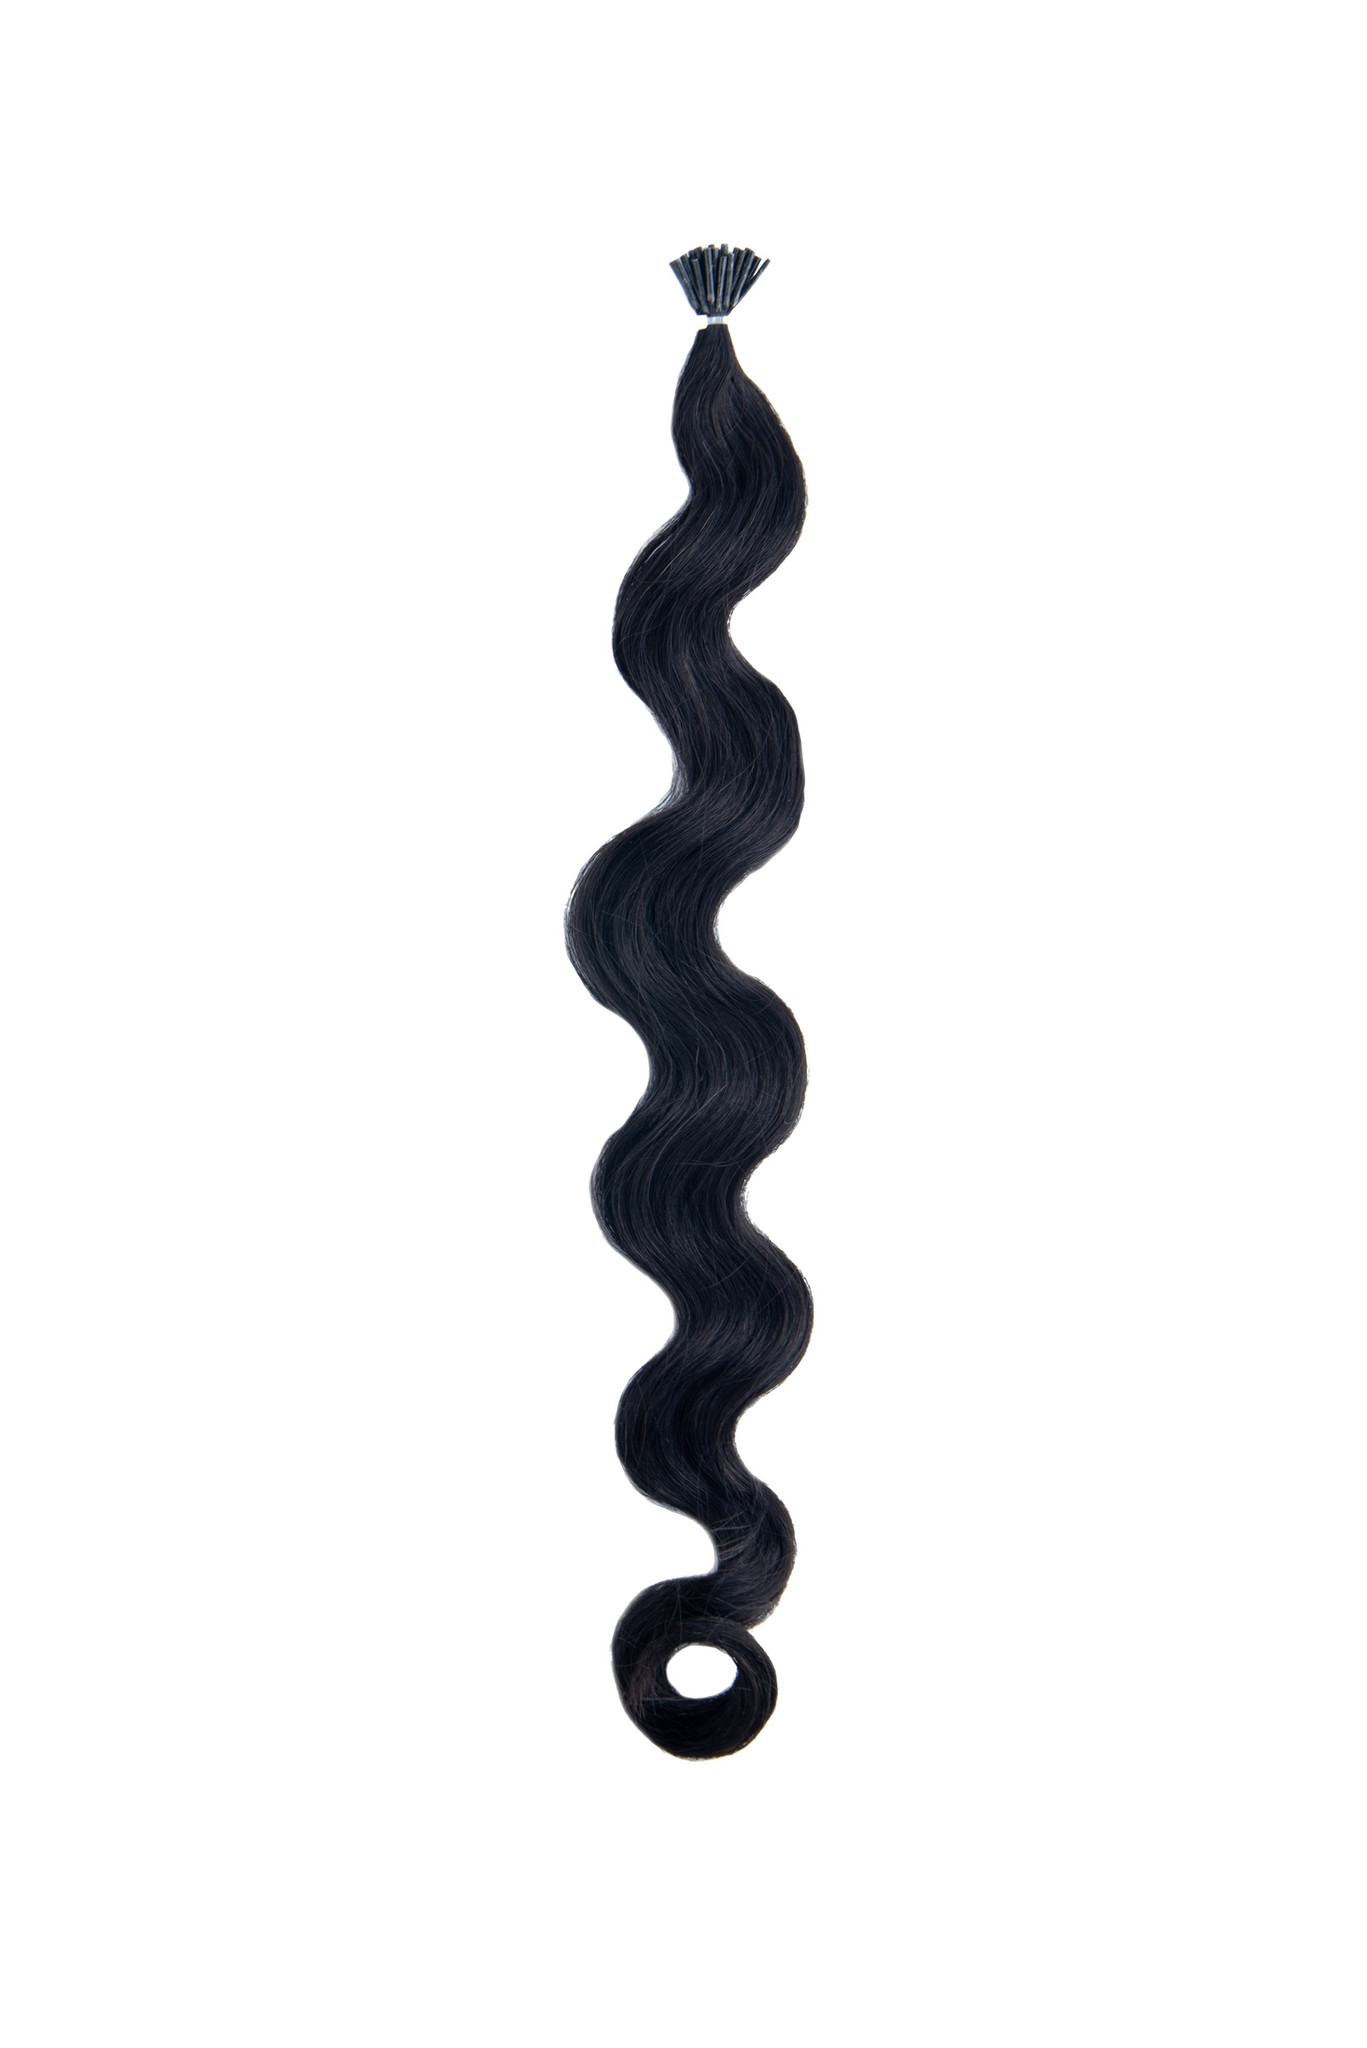 SilverFox Microring Extensions Loose Wave